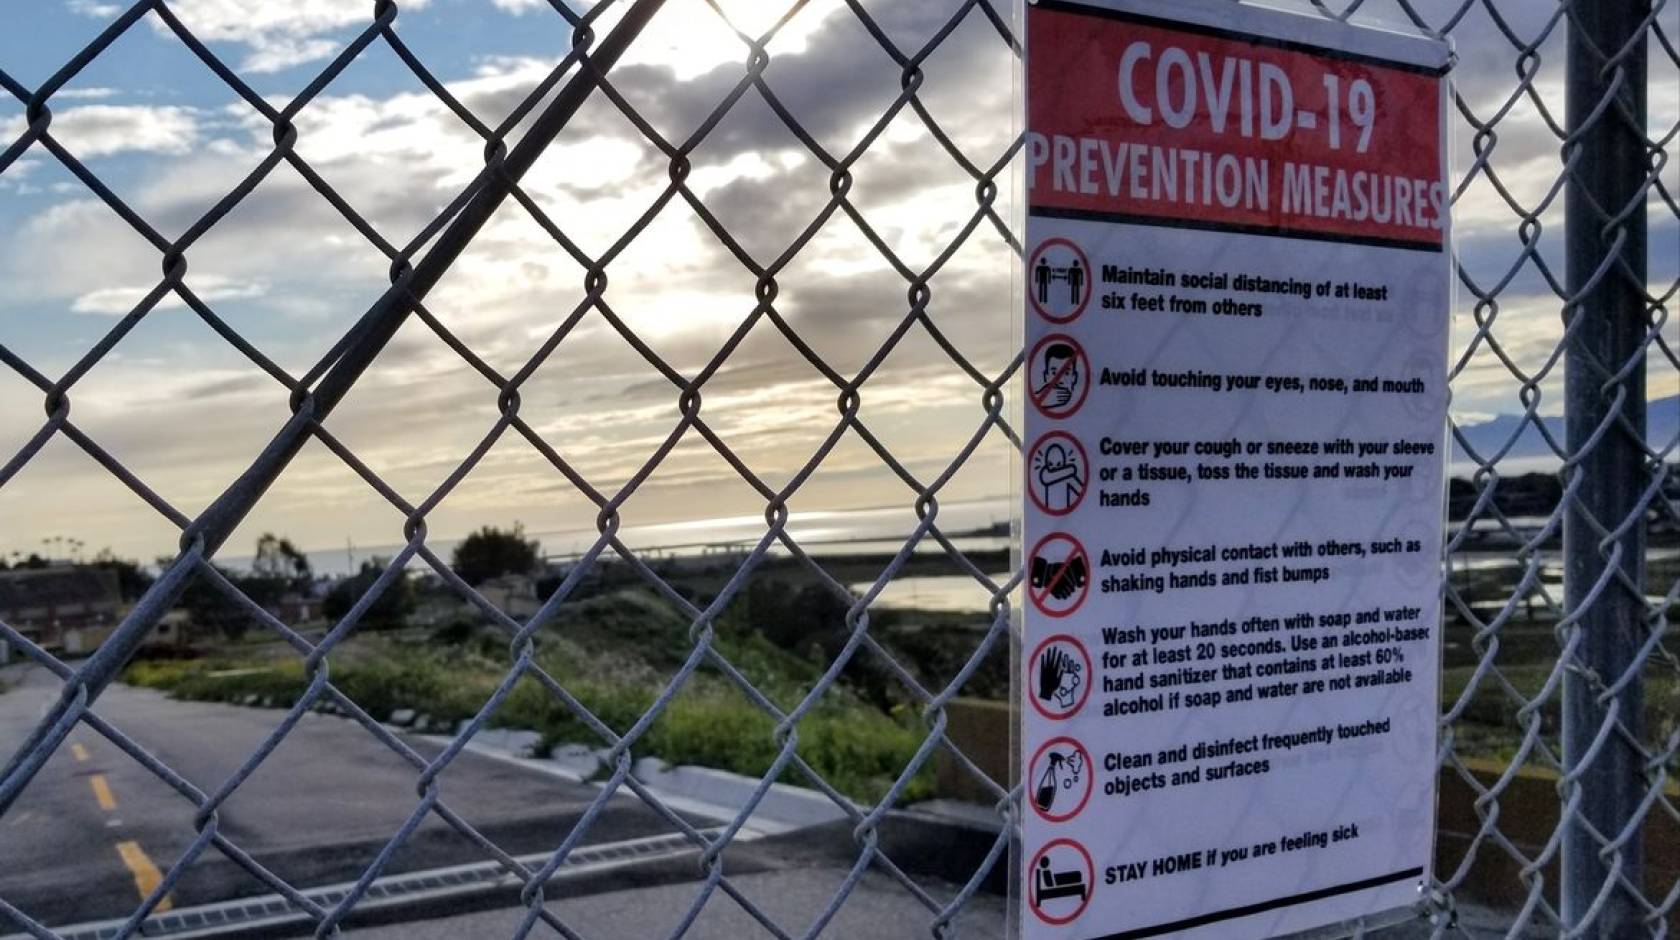 Sign on a fence about COVID-19 prevention measures